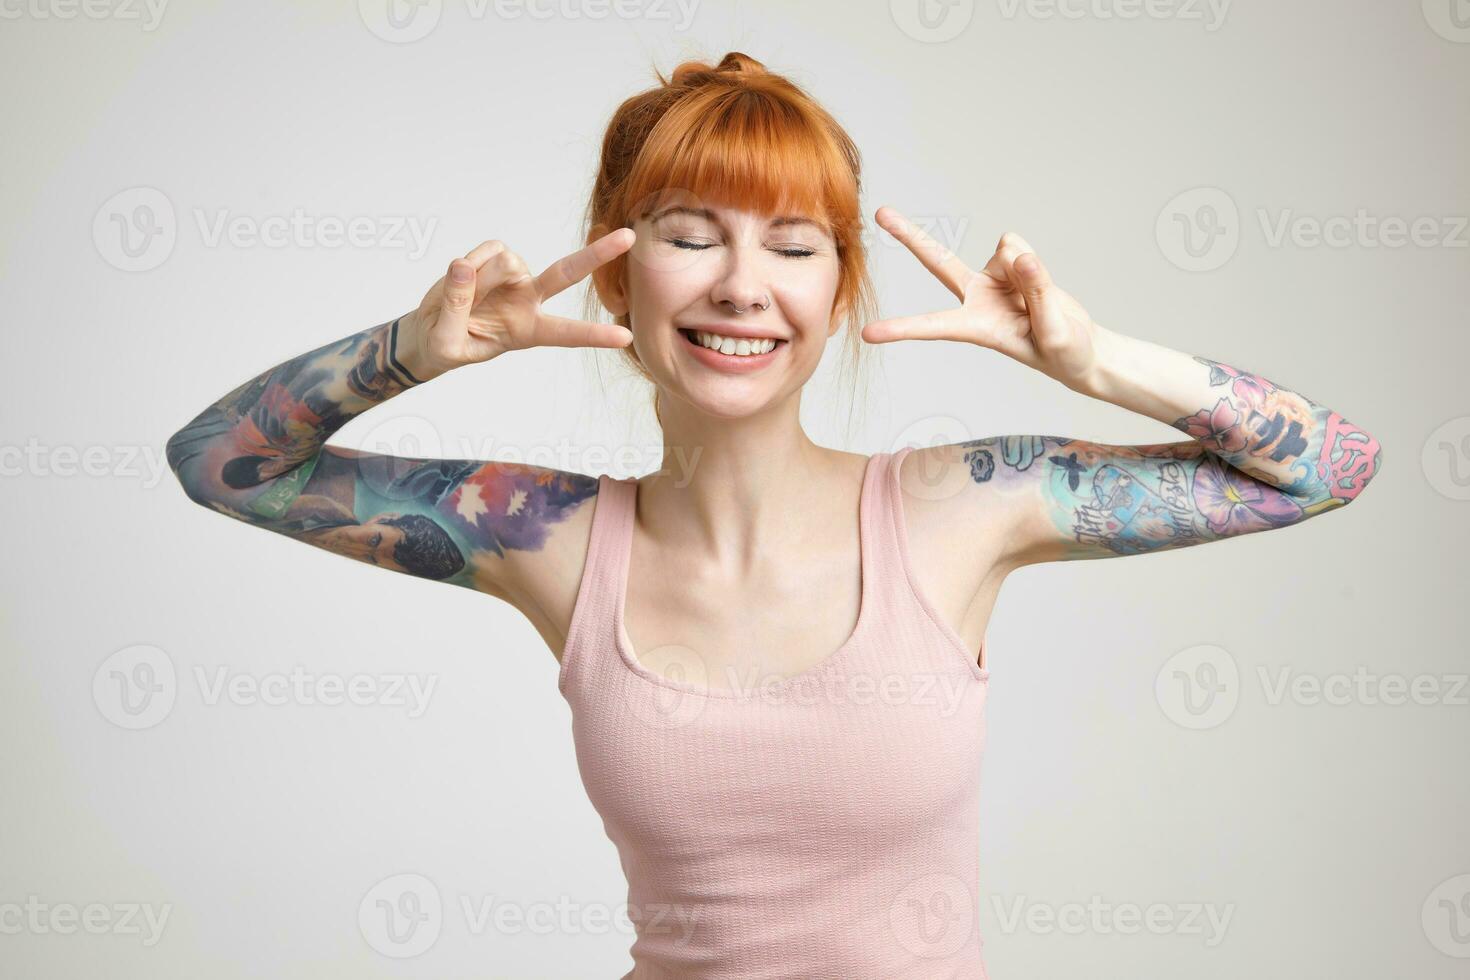 Good looking young cheerful tattooed woman with foxy hair raising hands with victory signs and smiling happily with closed eyes, posing over white background photo